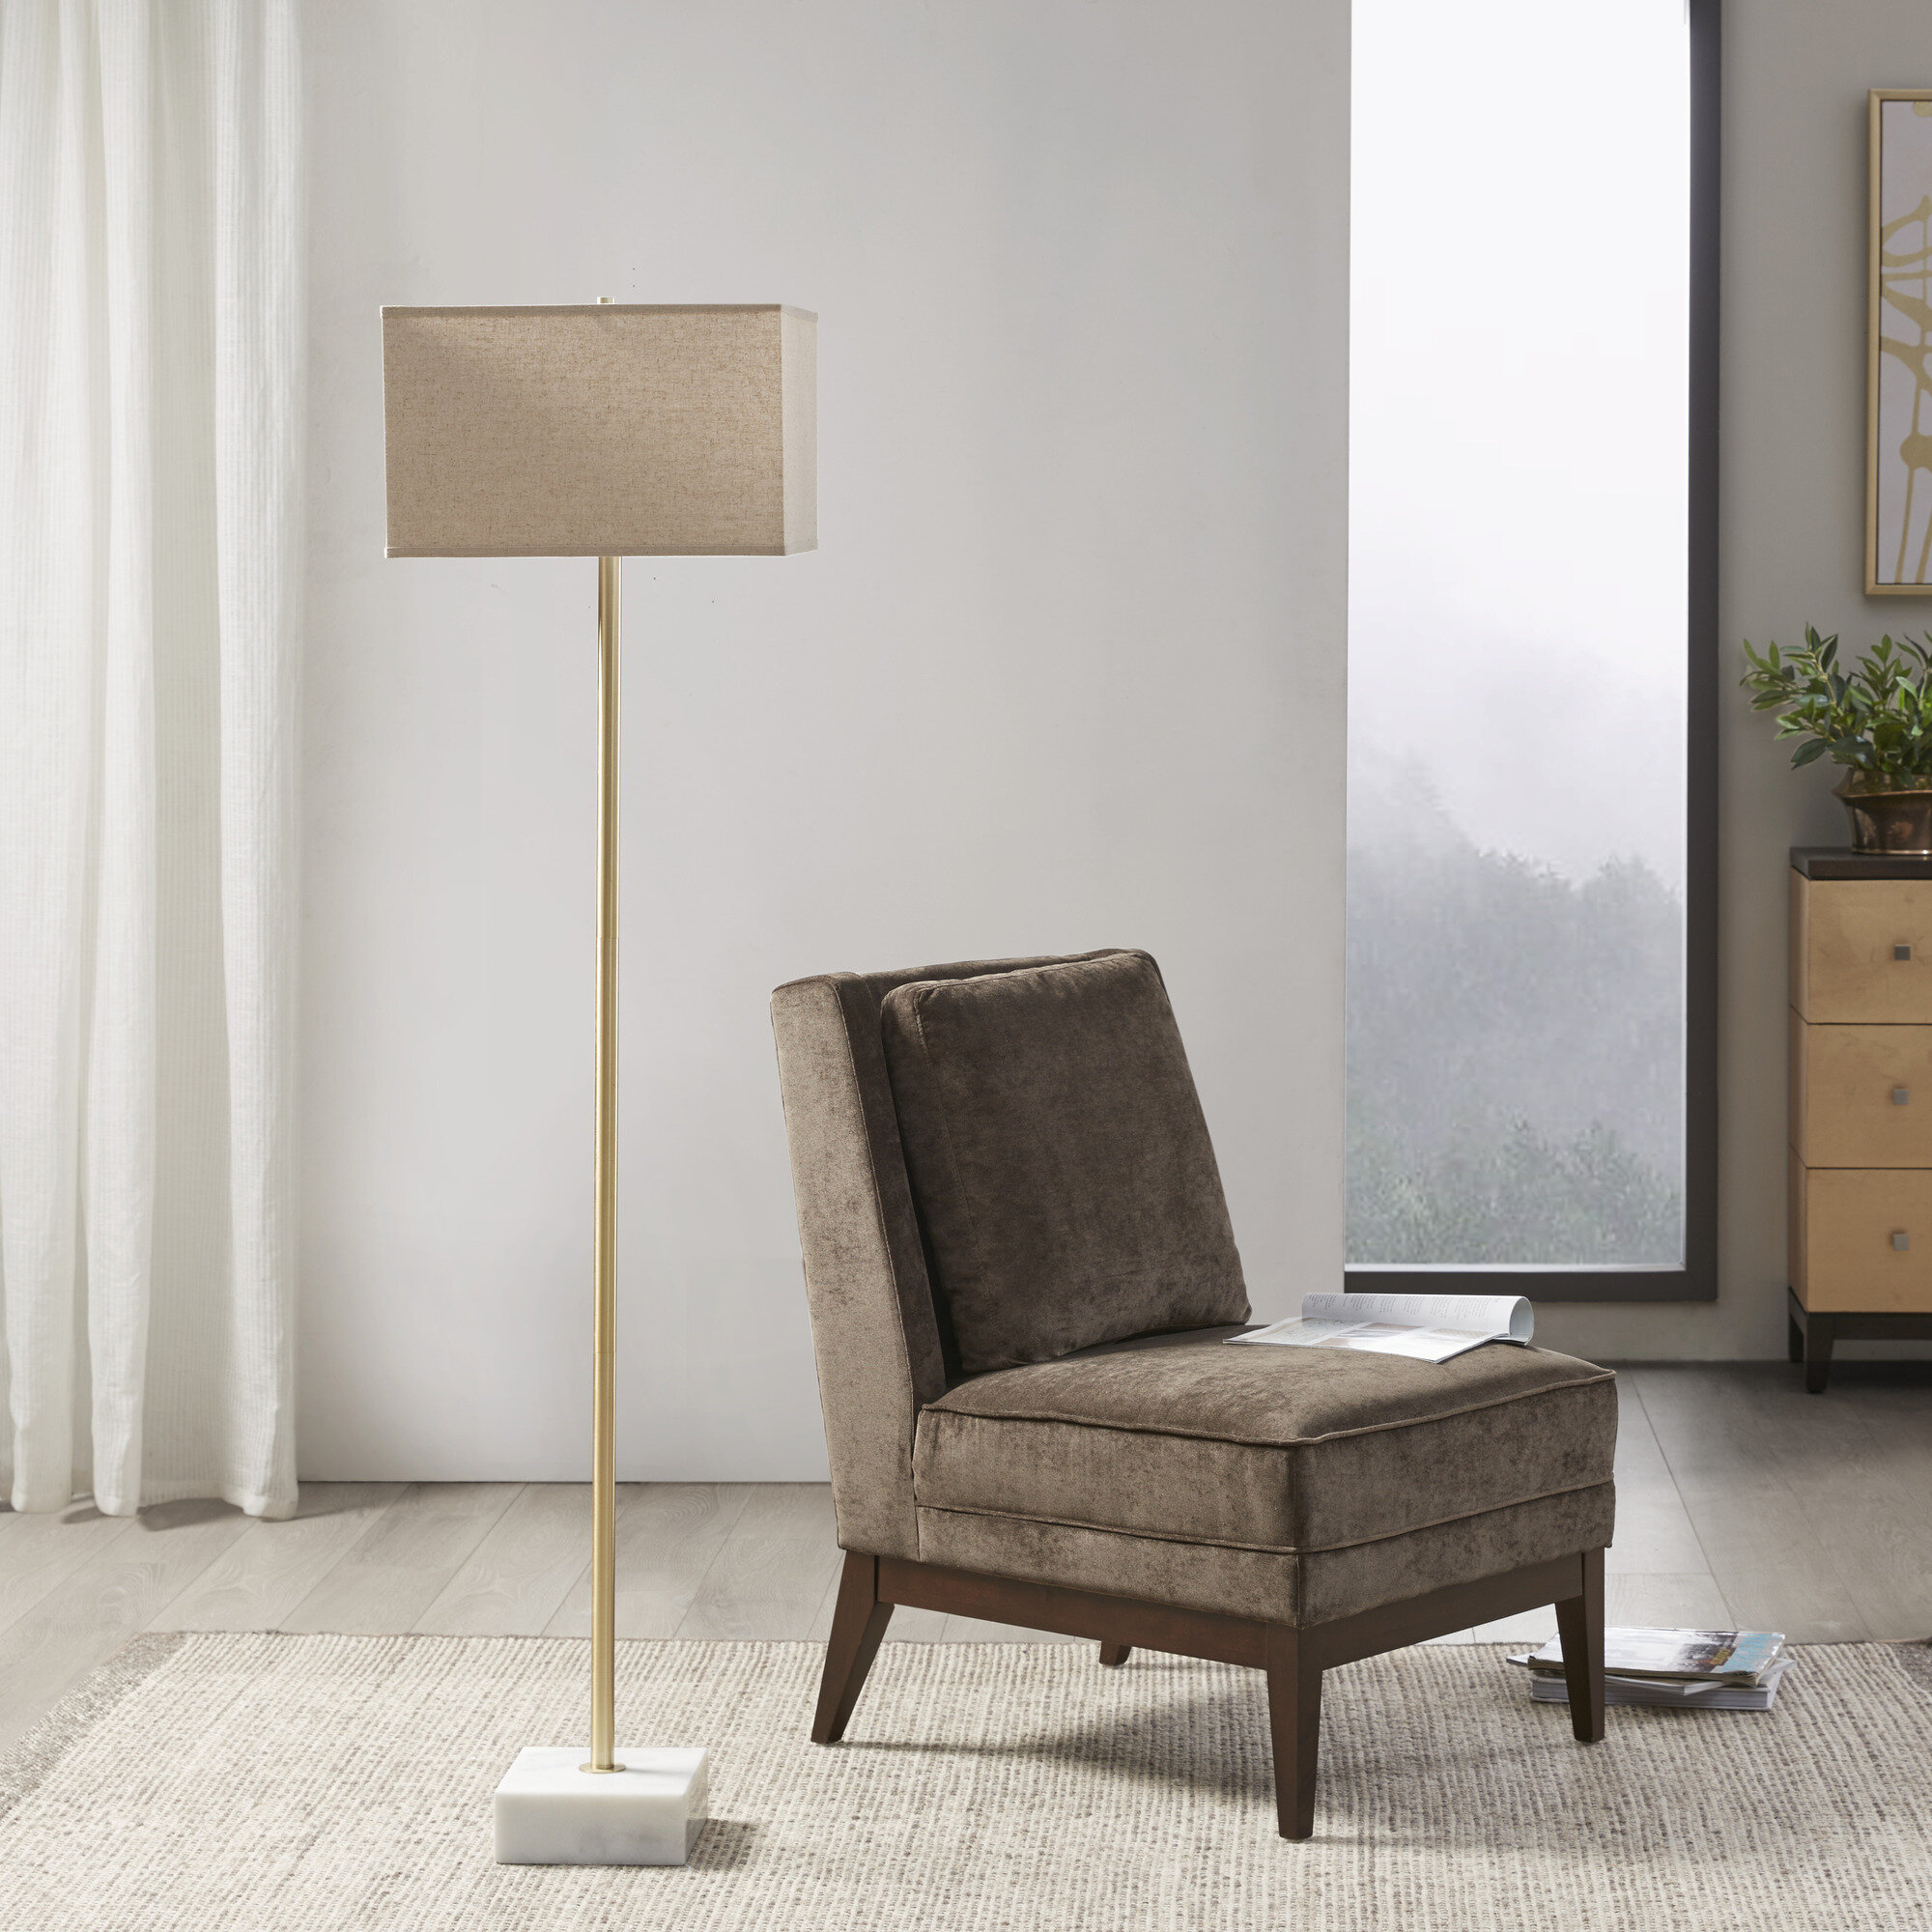 5 Expert Tips To Choose A Floor Lamp - VisualHunt